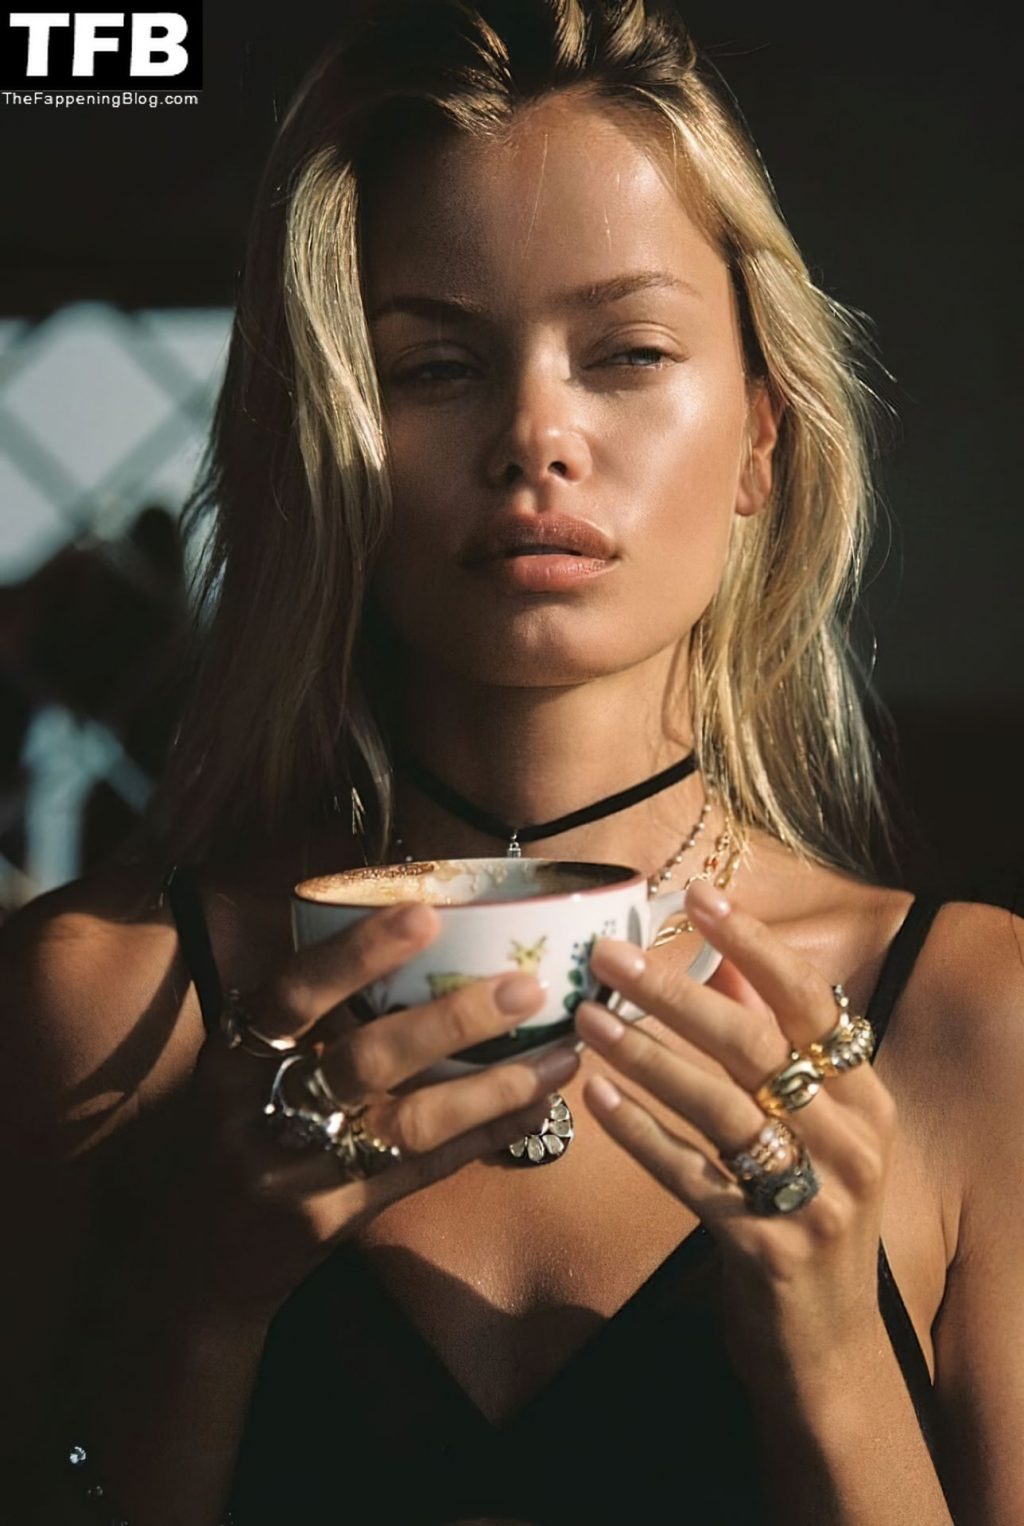 Frida Aasen Displays Her Gorgeous Figure in Skimpy Lingerie for Vanessa Moody 2021 Campaign (31 Photos)